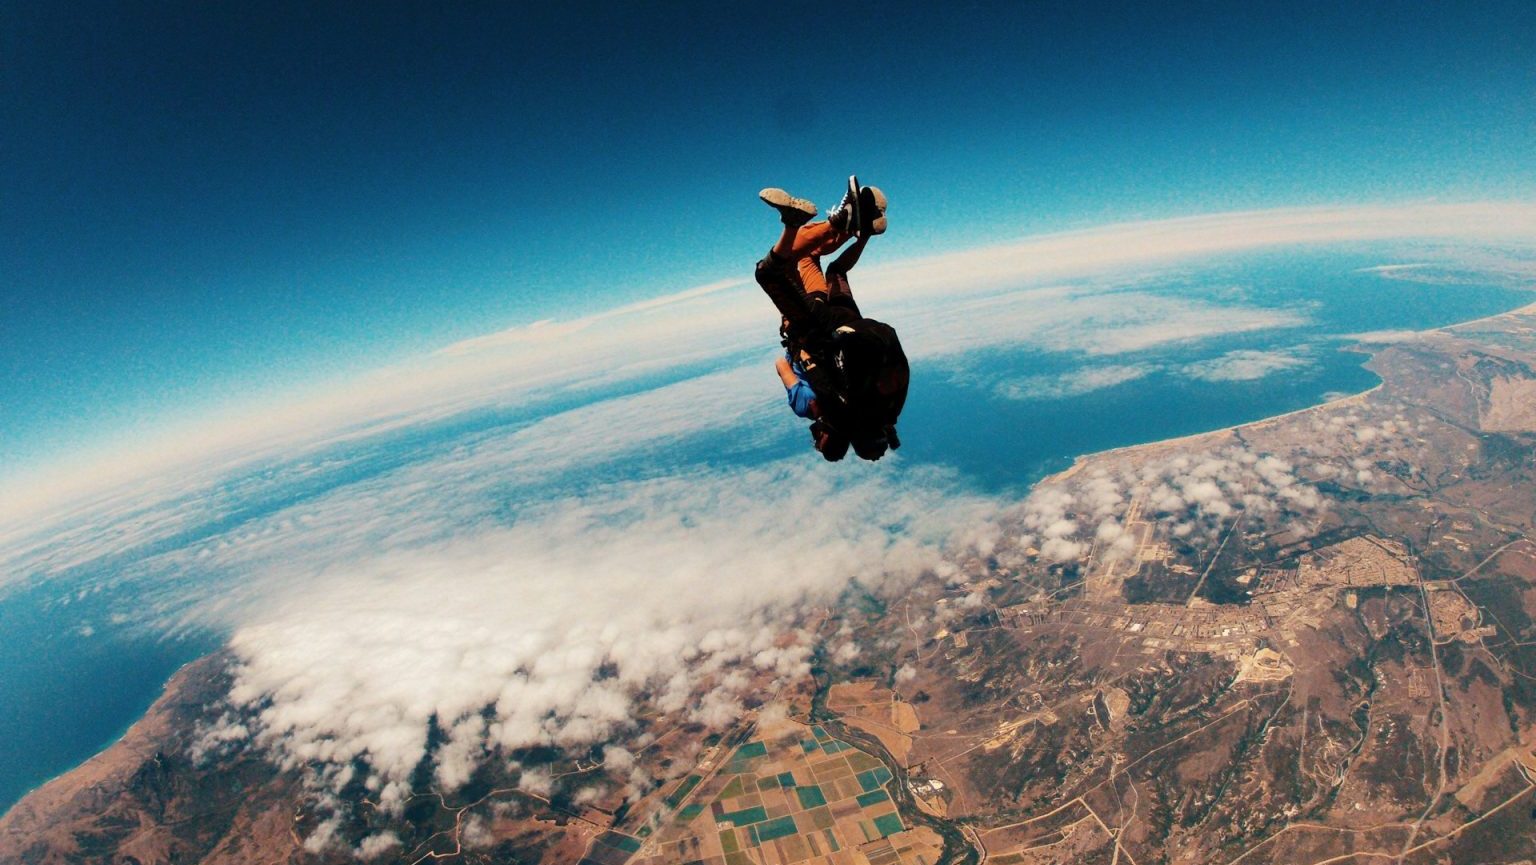 Two people are tandem skydiving, falling through the air above a landscape of fields, mountains, and coastline under a clear sky.